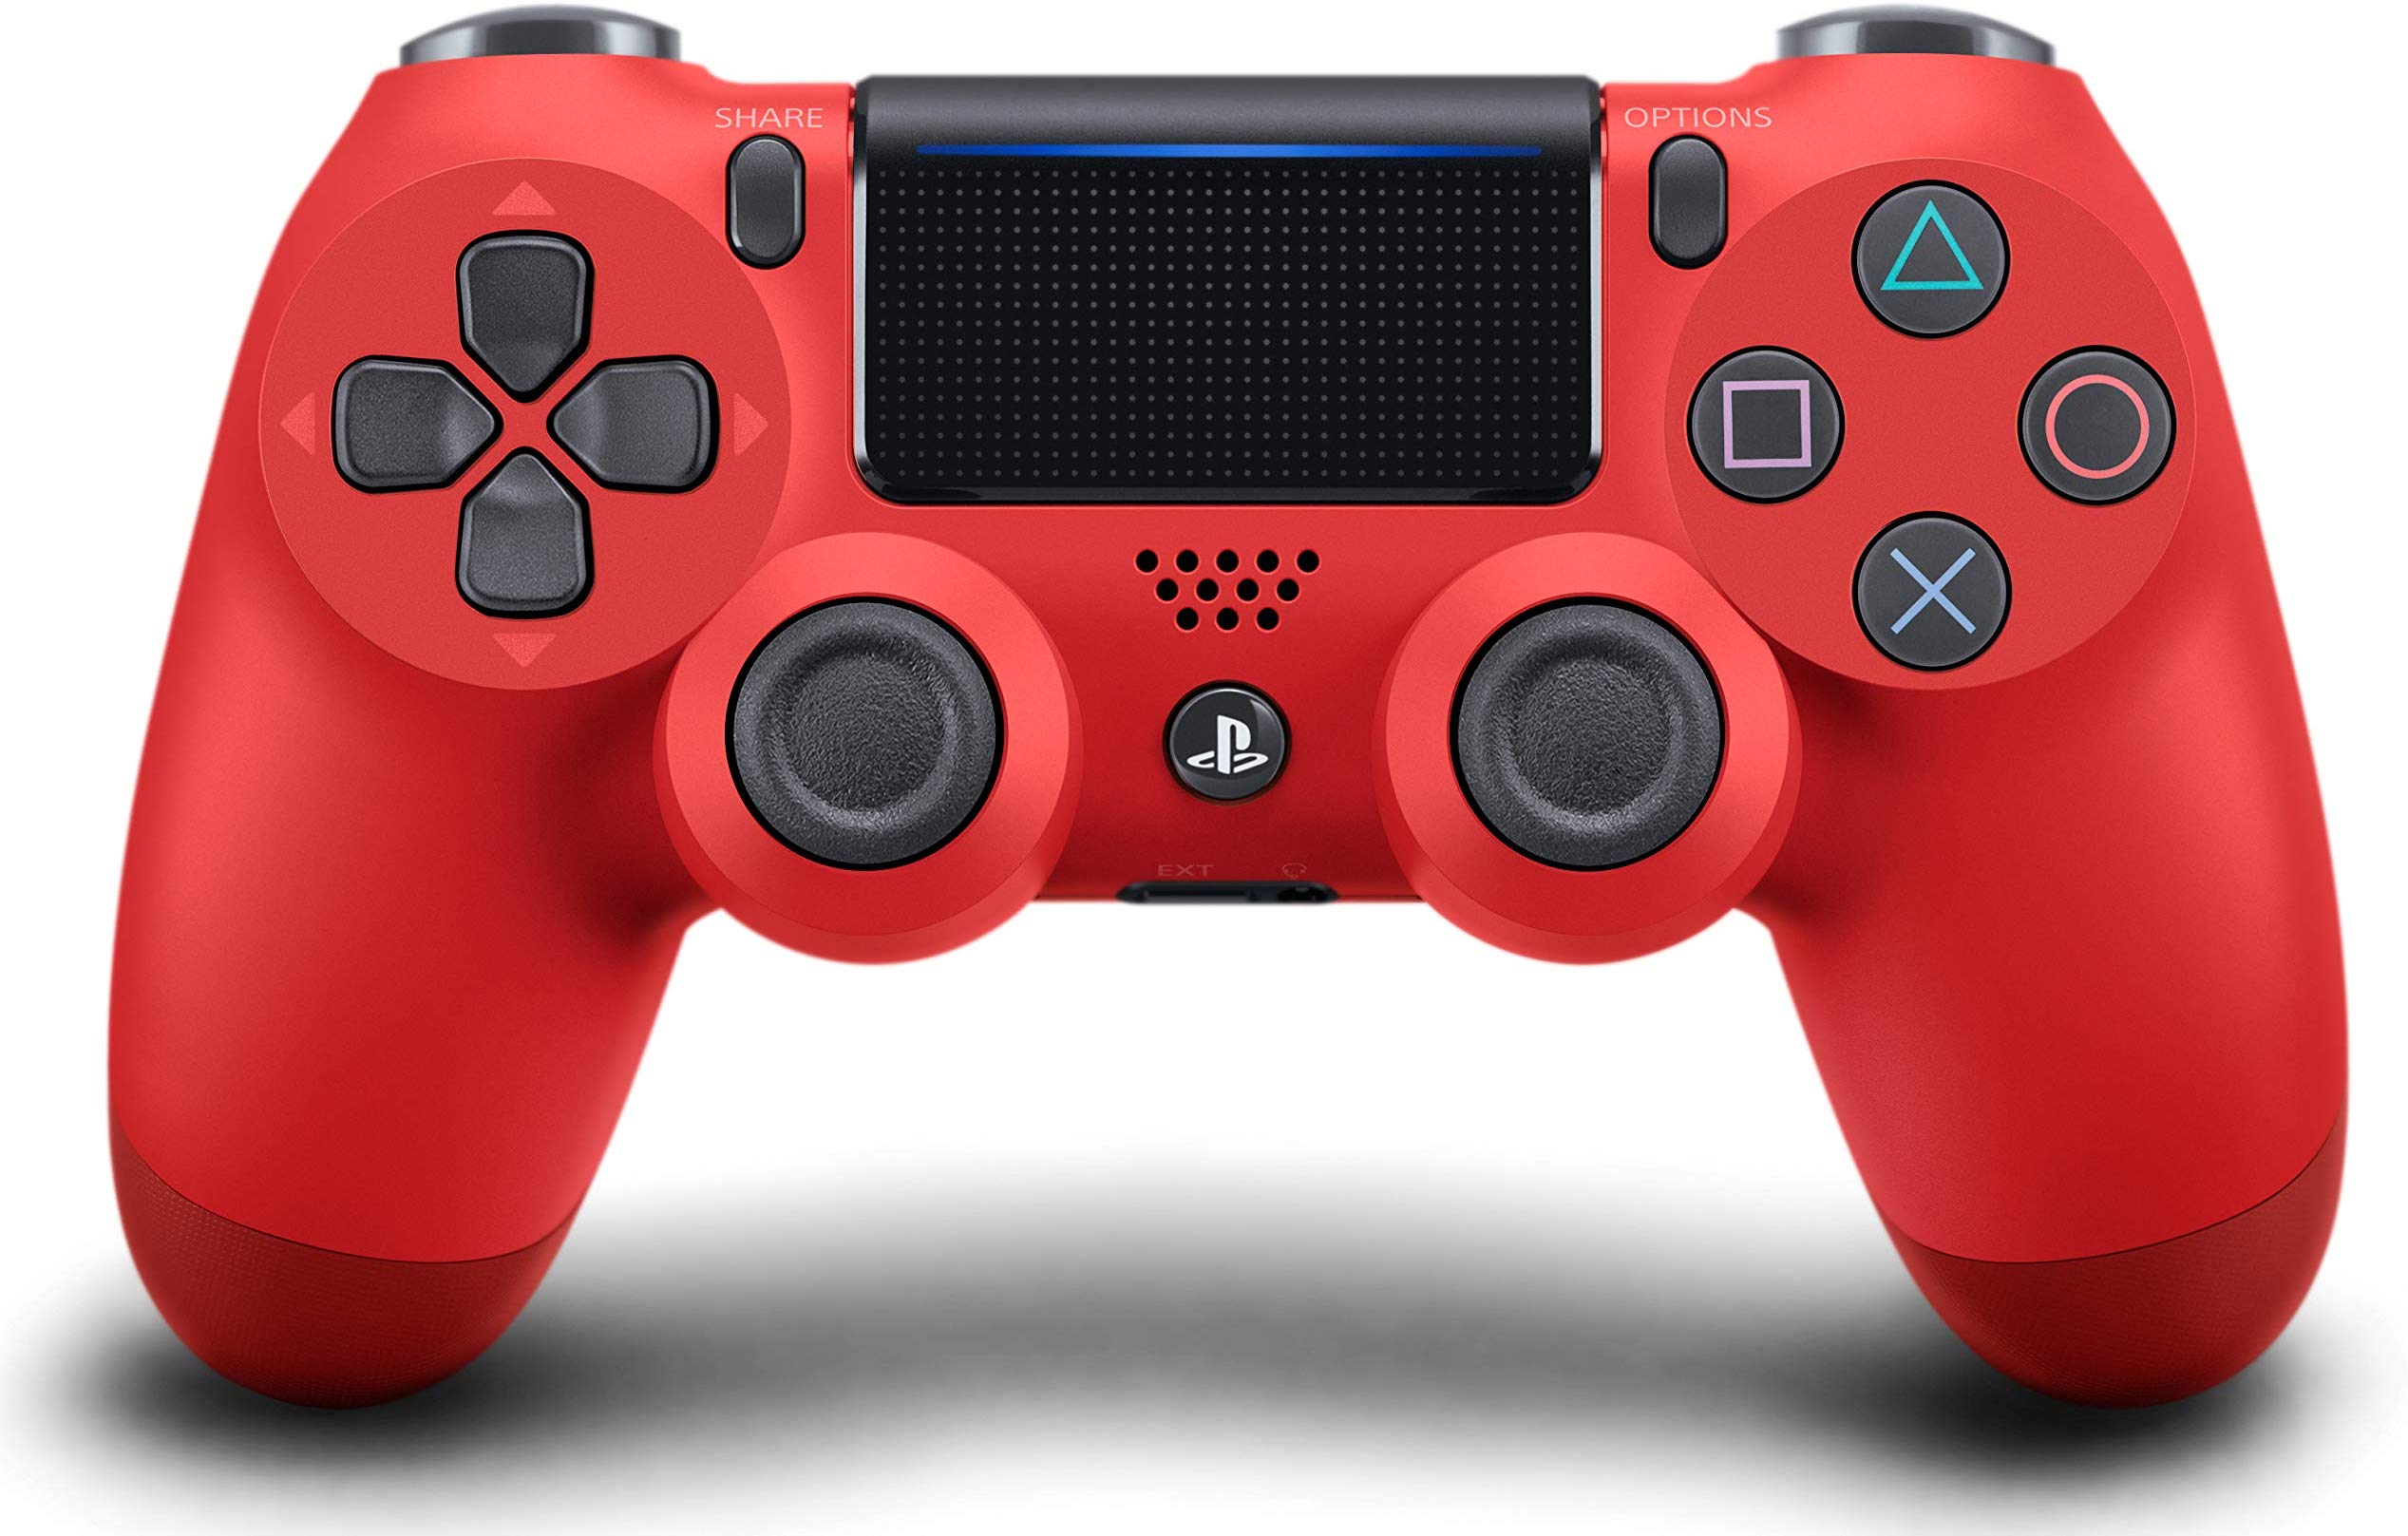 Sony PlayStation 4 DualShock 4 Wireless Controller - Red - New Version - Pro-Distributing